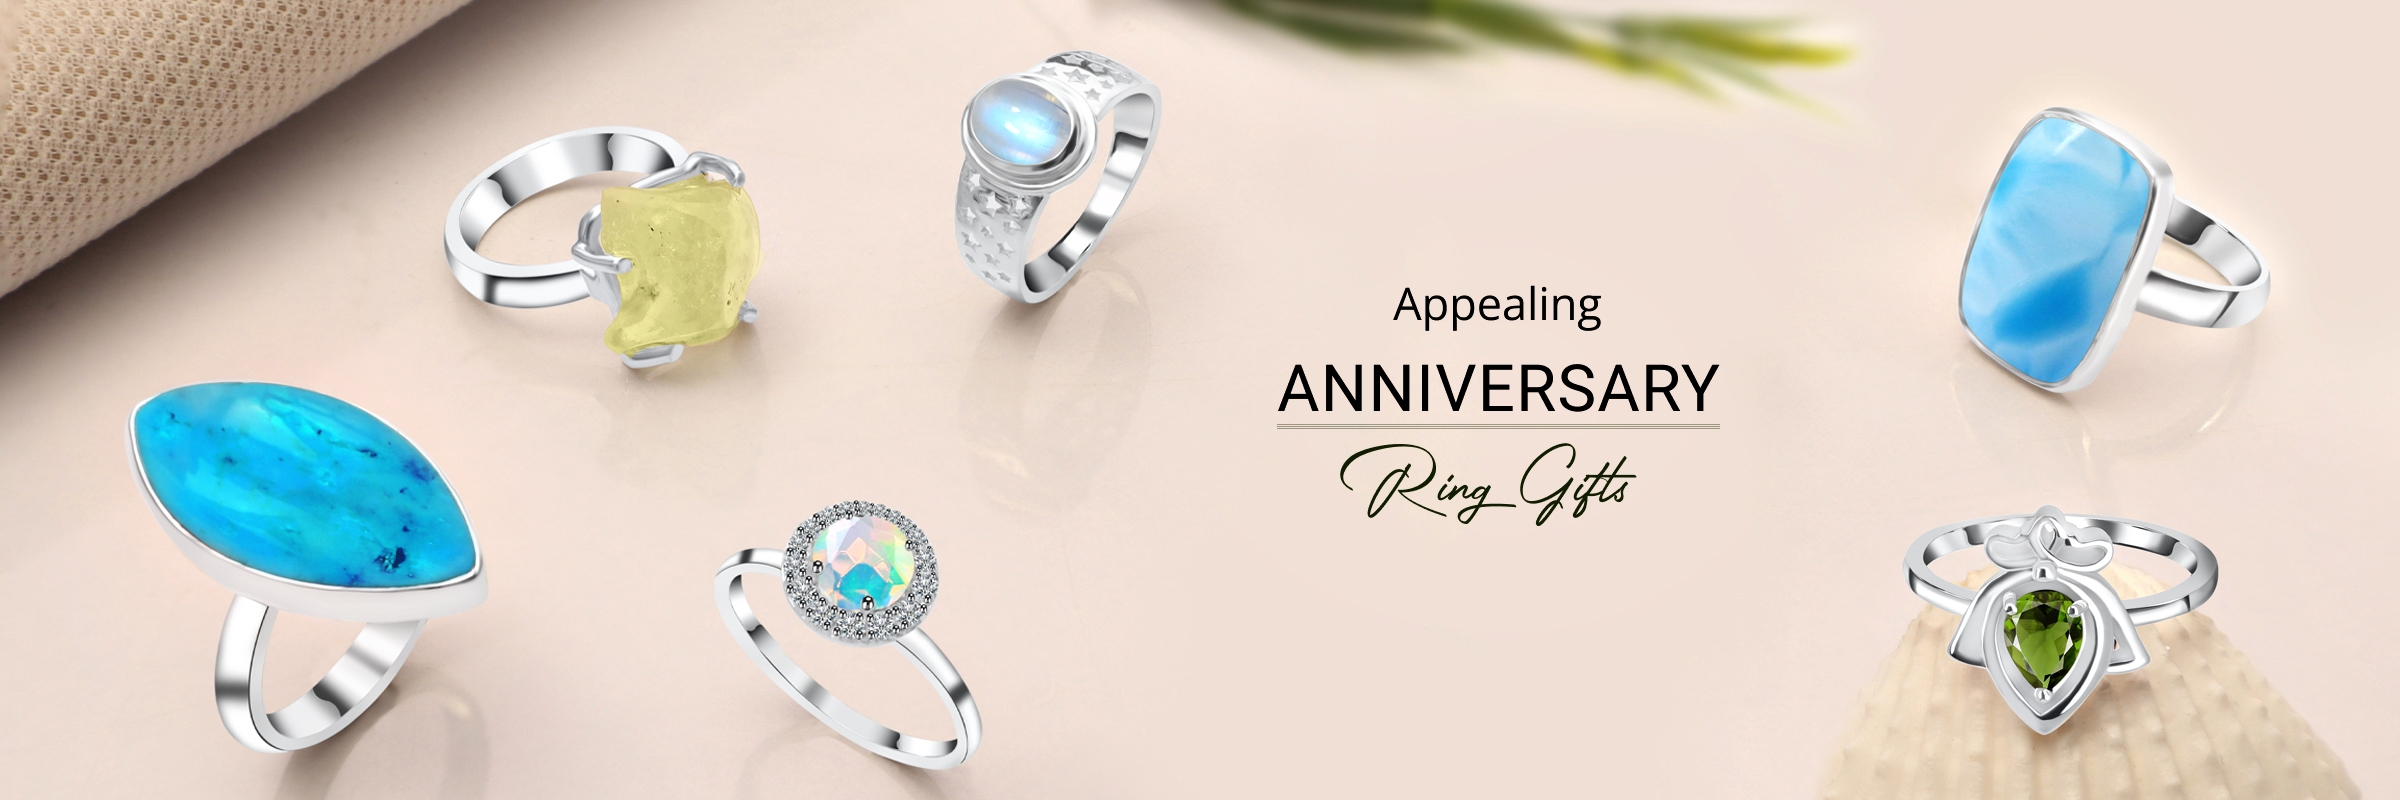 Appealing Anniversary Ring Gifts 